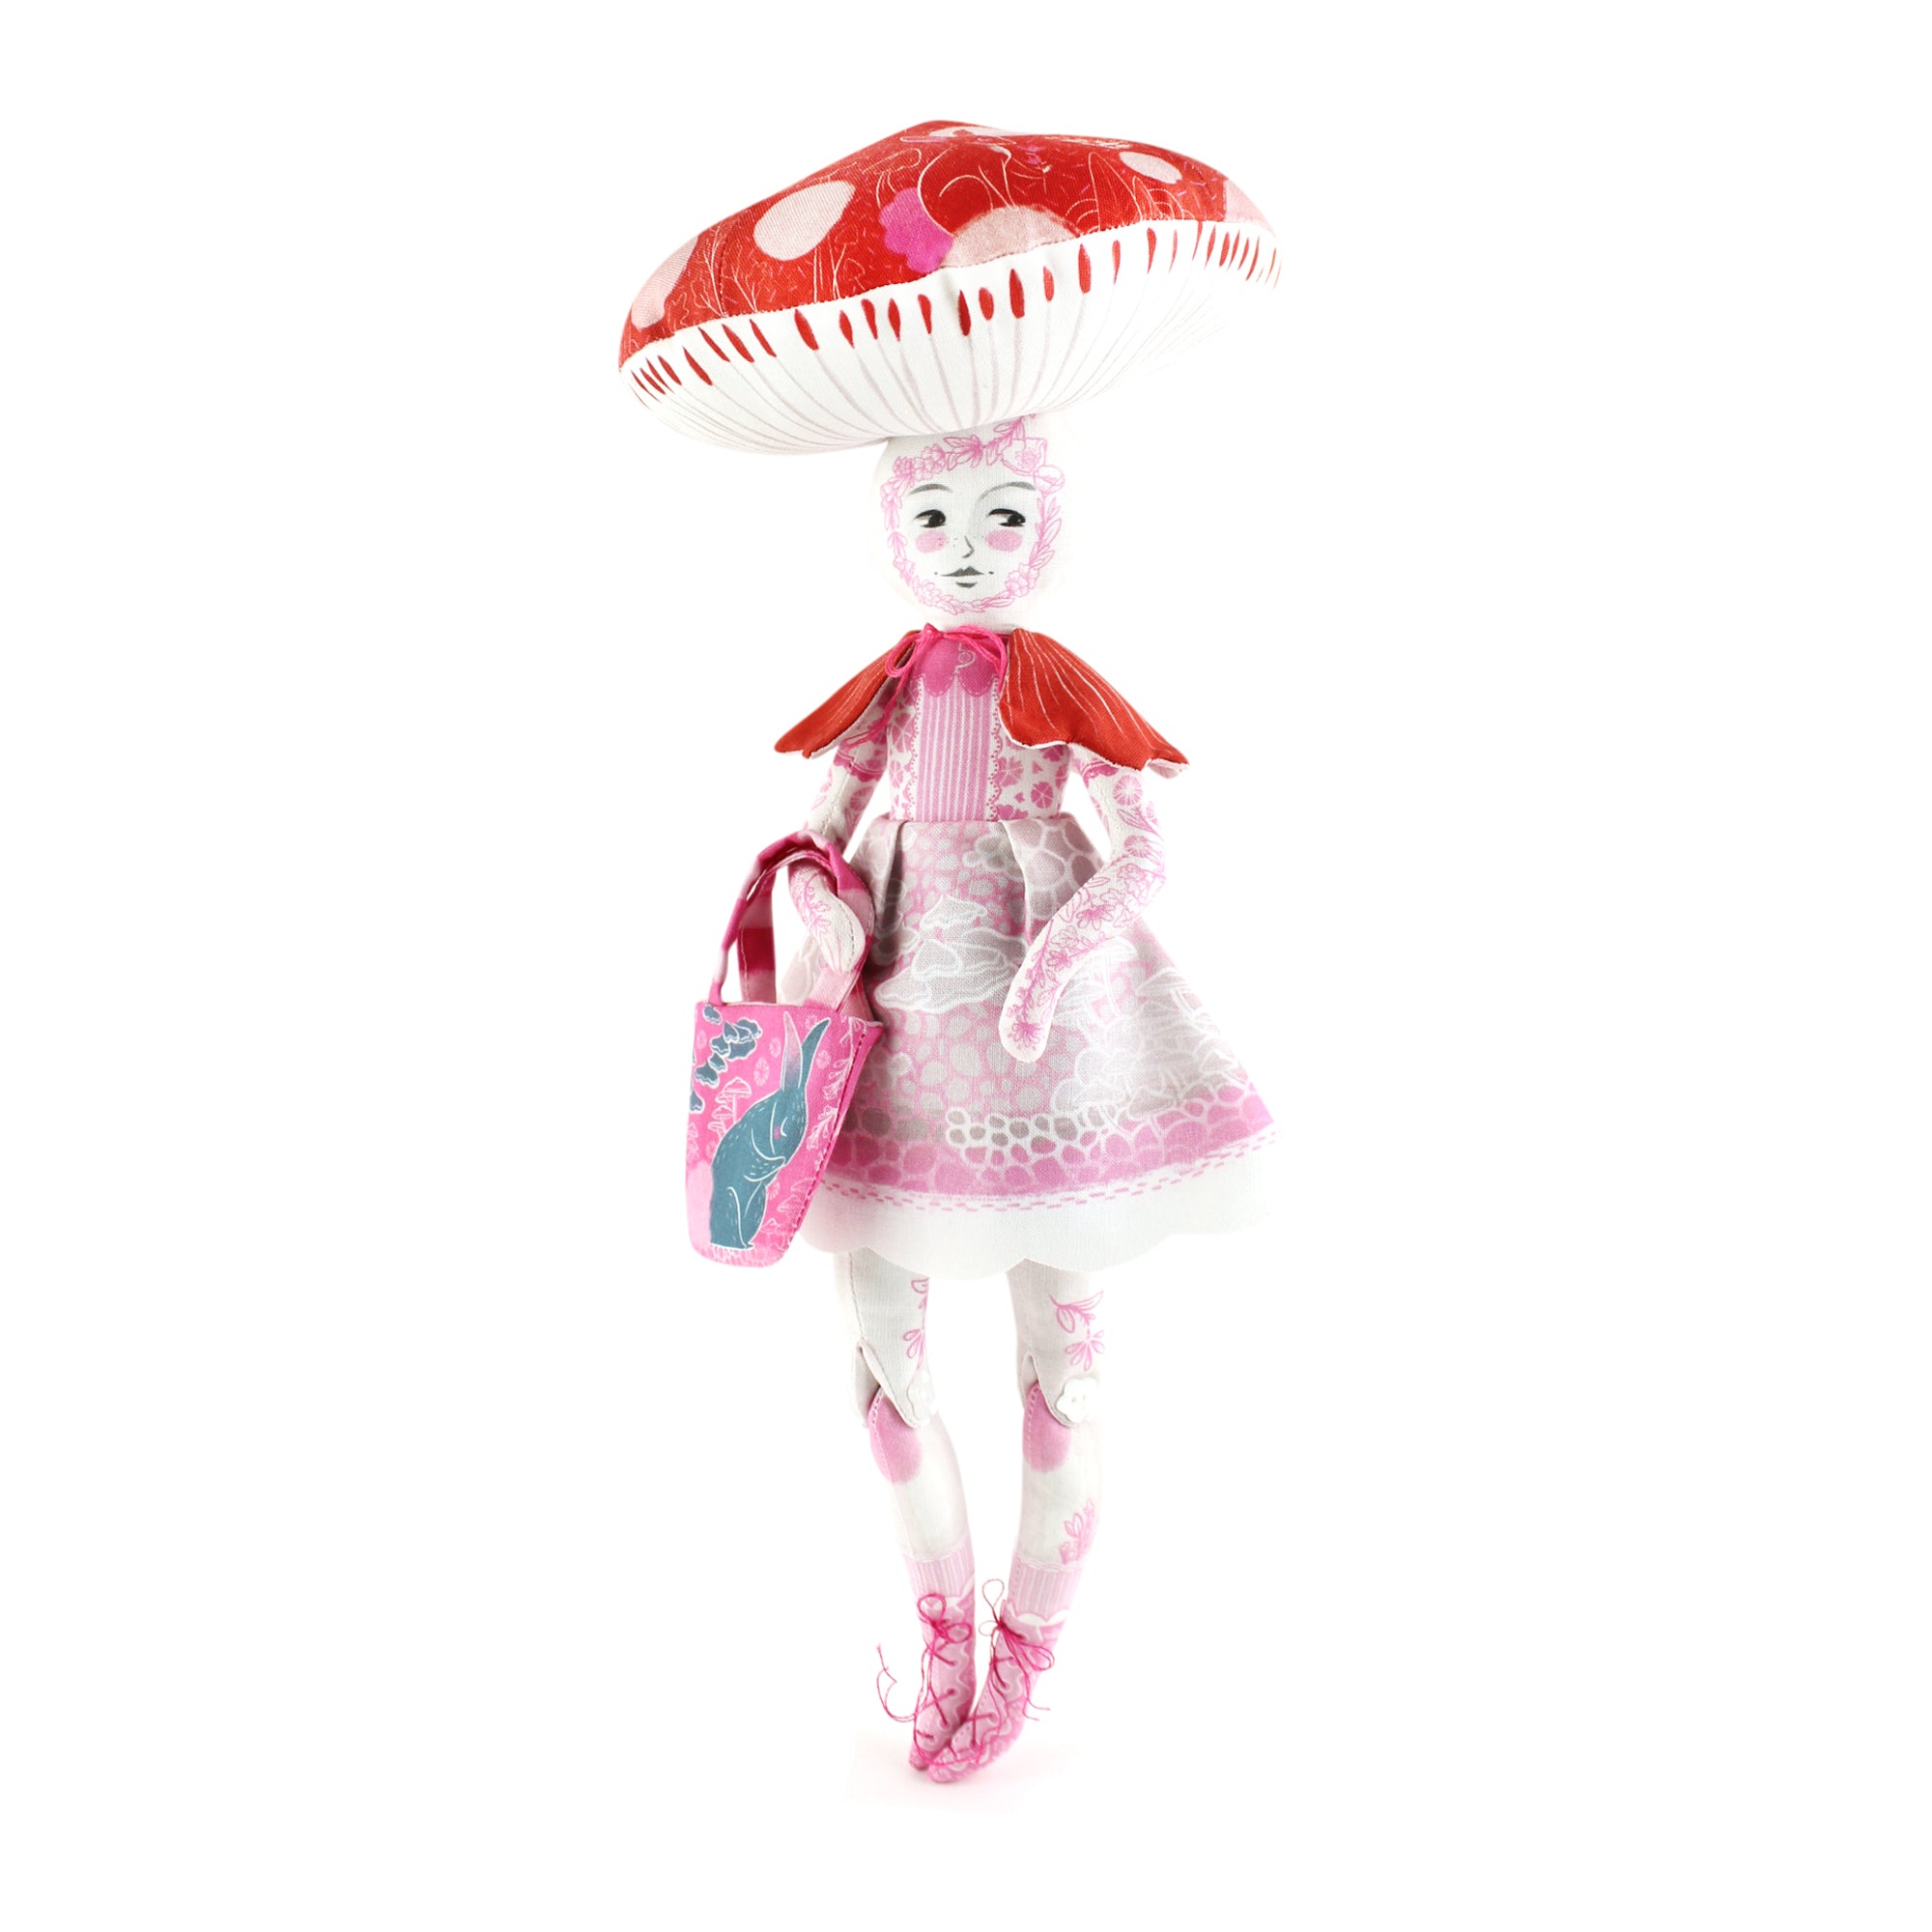 Patience the Mushroom Girl with 20 zen cards of hope - Collectors Doll